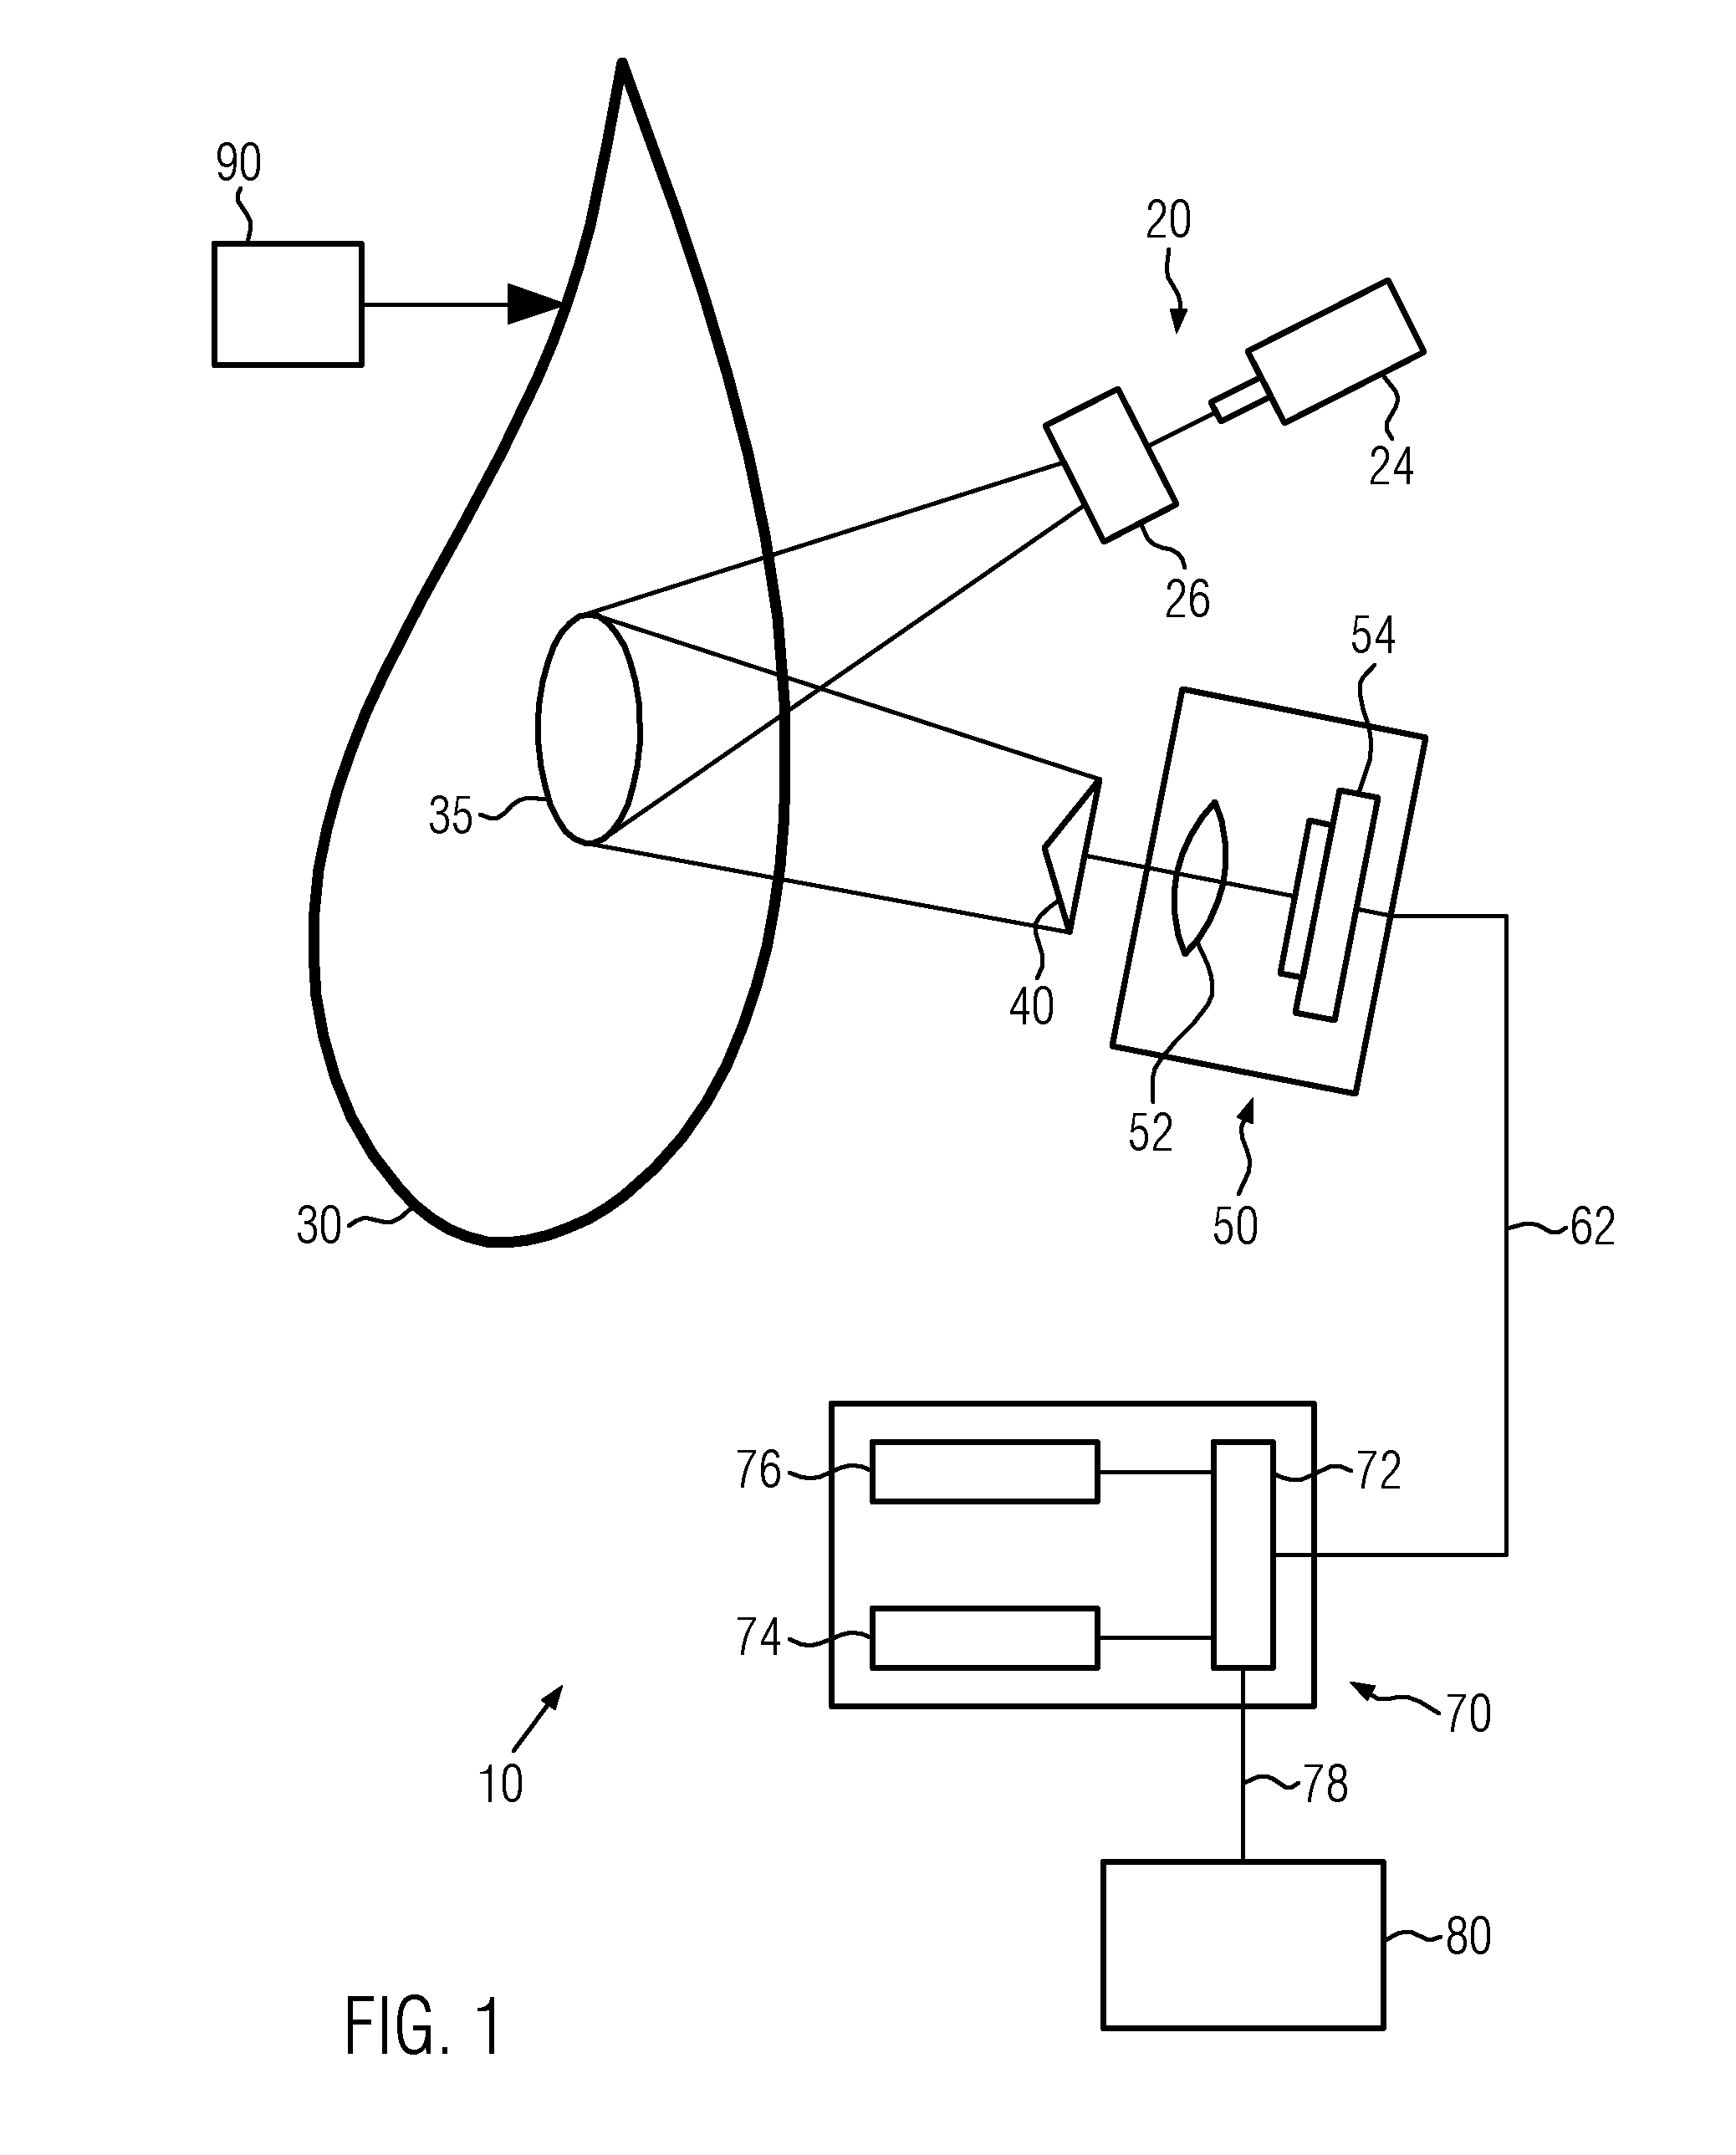 Method of analyzing deformations in a laminated object and according system